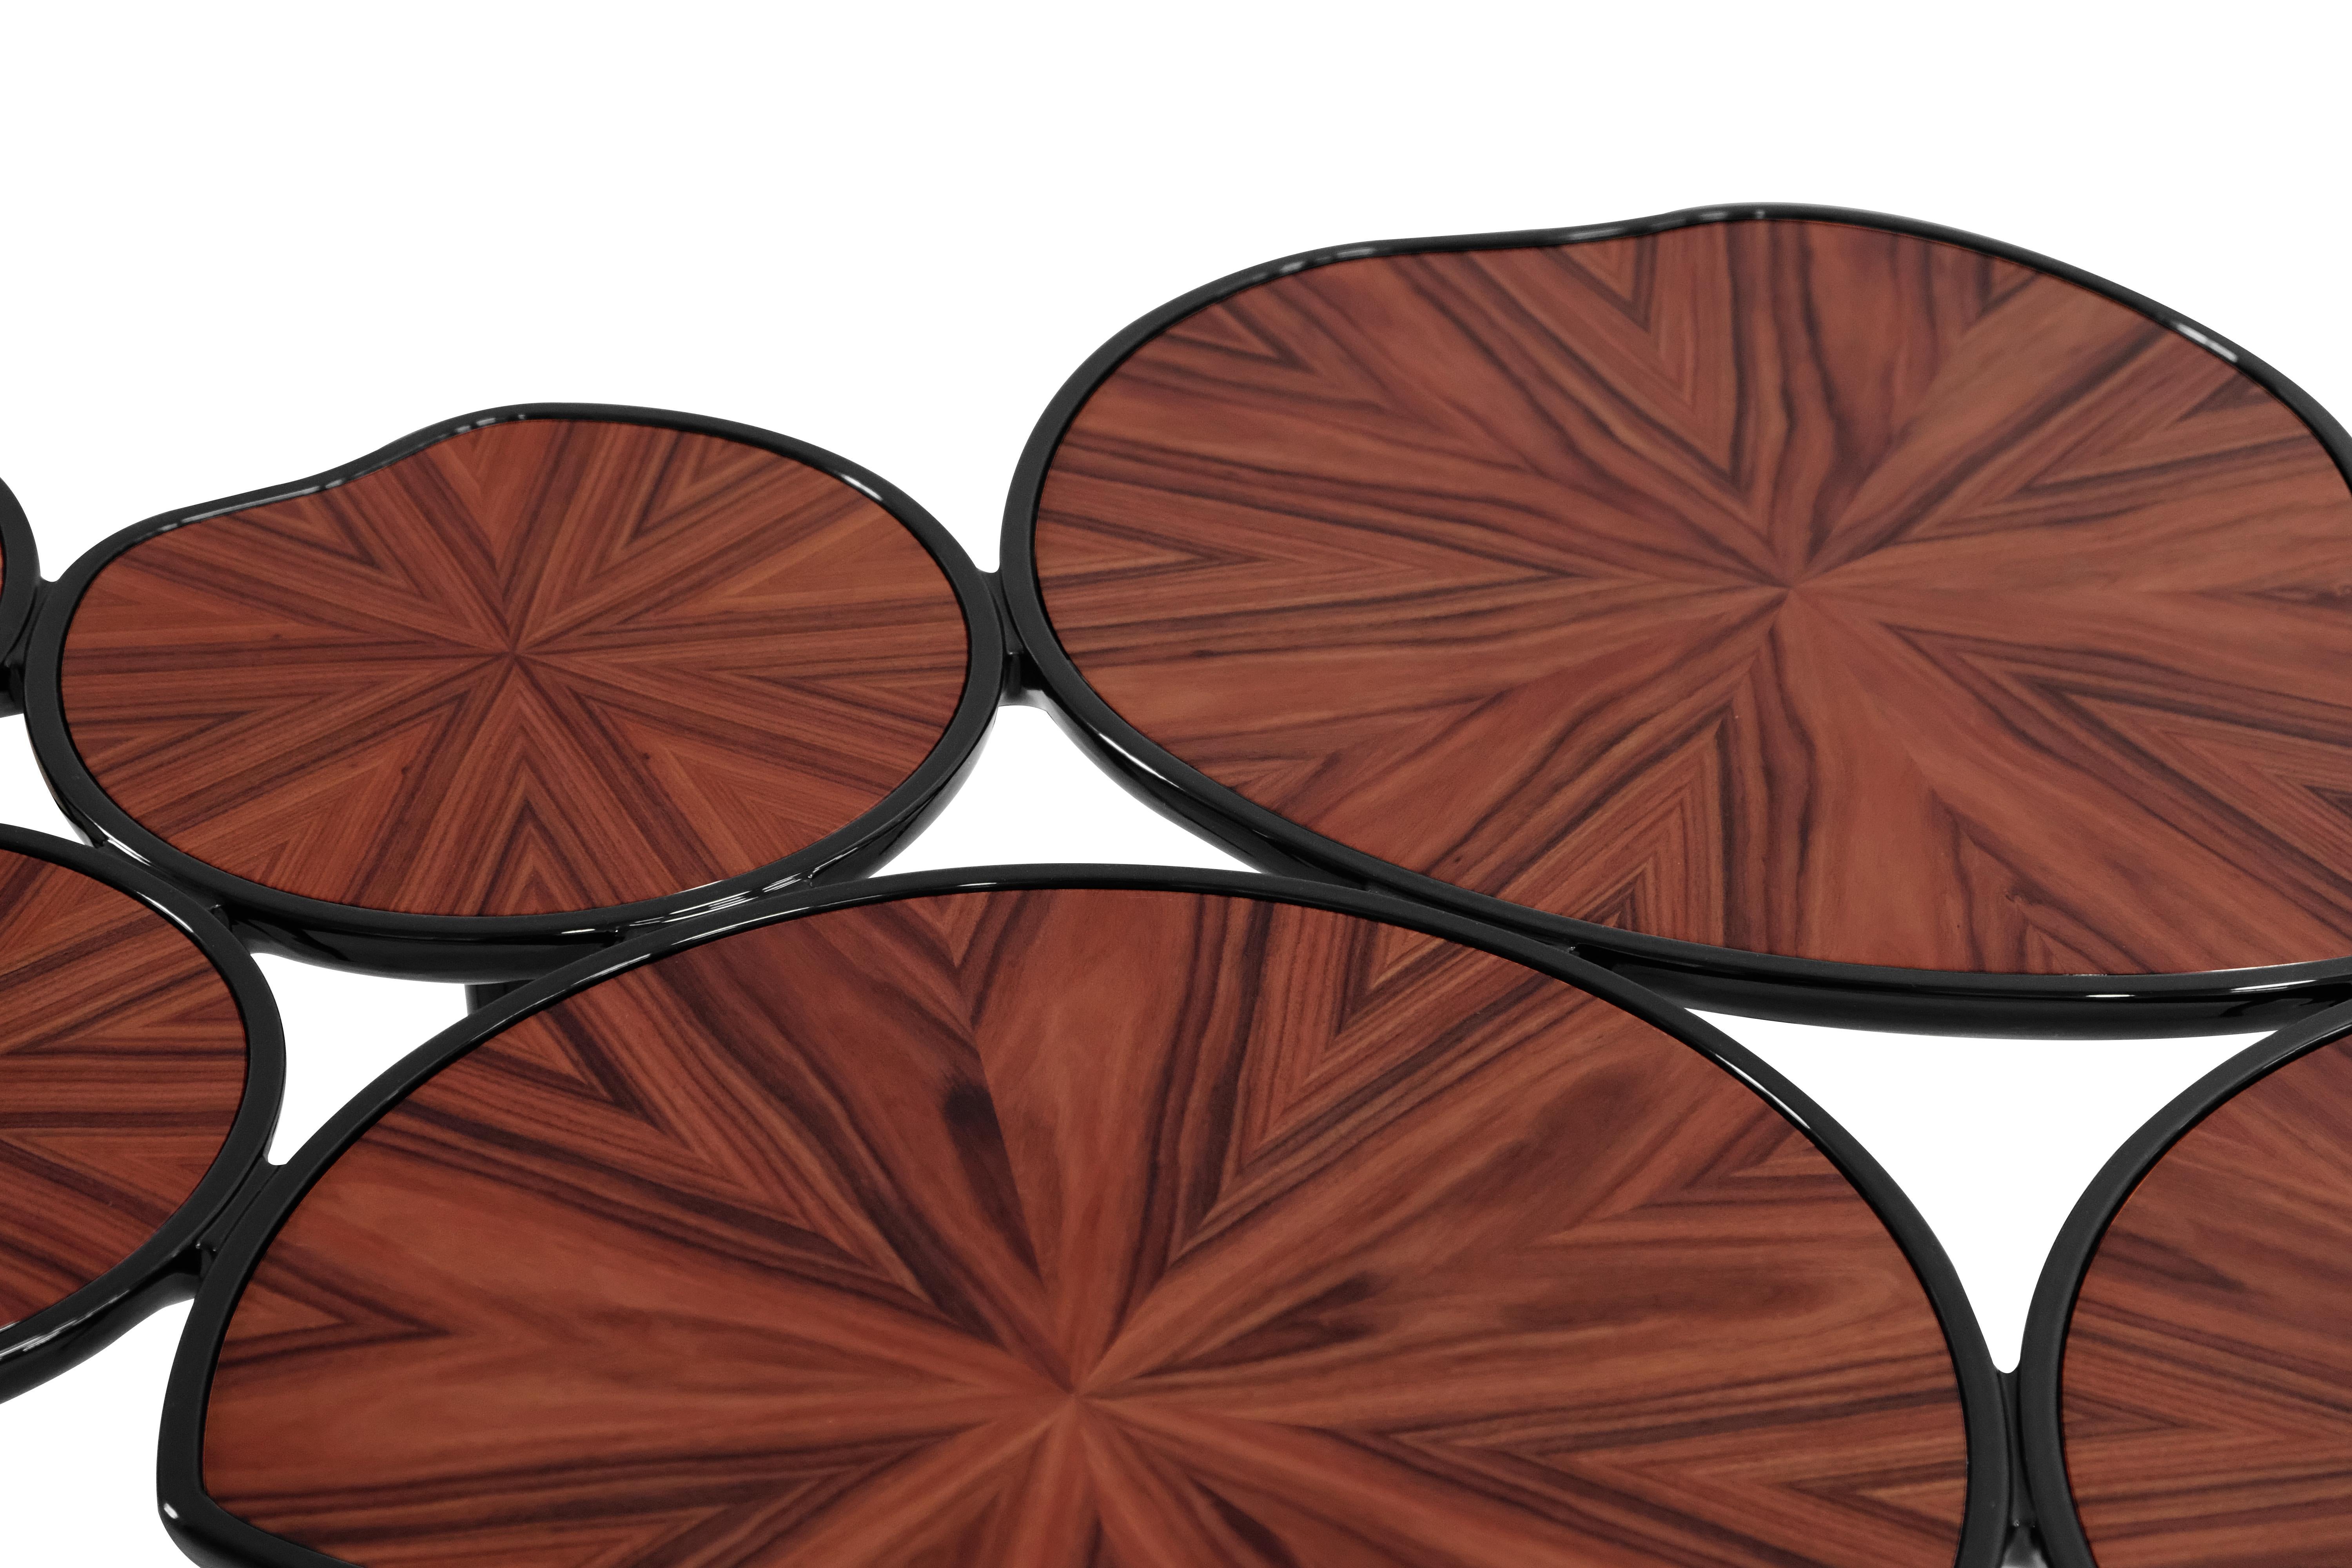 Contemporary 21st Century Waterlily Center Table Walnut Wood Lacquered Legs For Sale